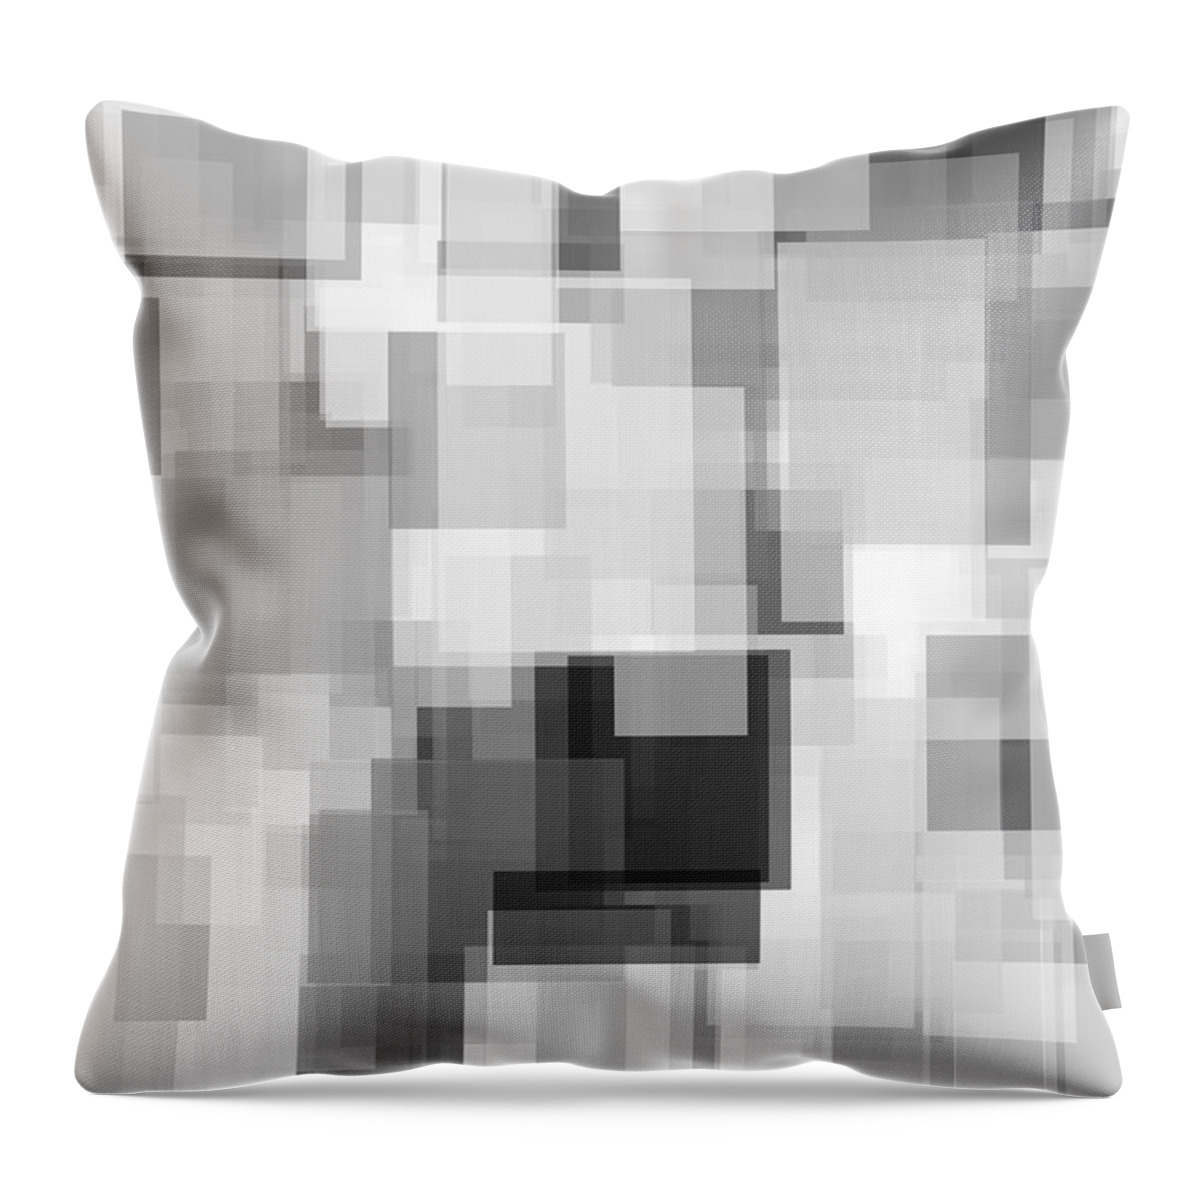 Monday Throw Pillow featuring the digital art Monday by Cheryl Charette